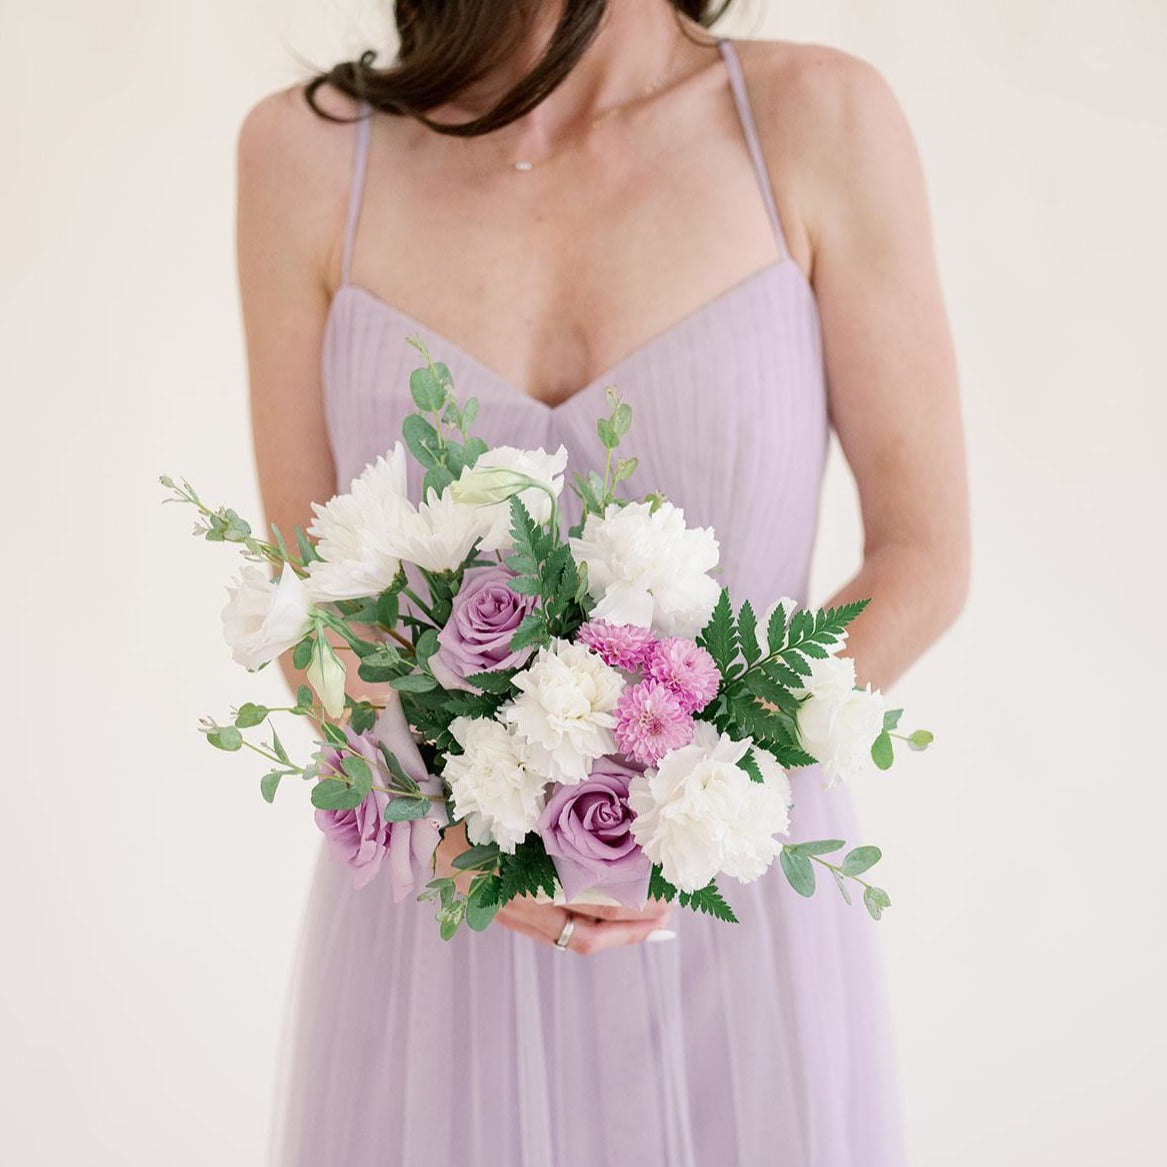 Lavender and cream Bridesmaid Bouquet with Ocean Song, White Lisianthus, White Carnations DIY Flower Moxie